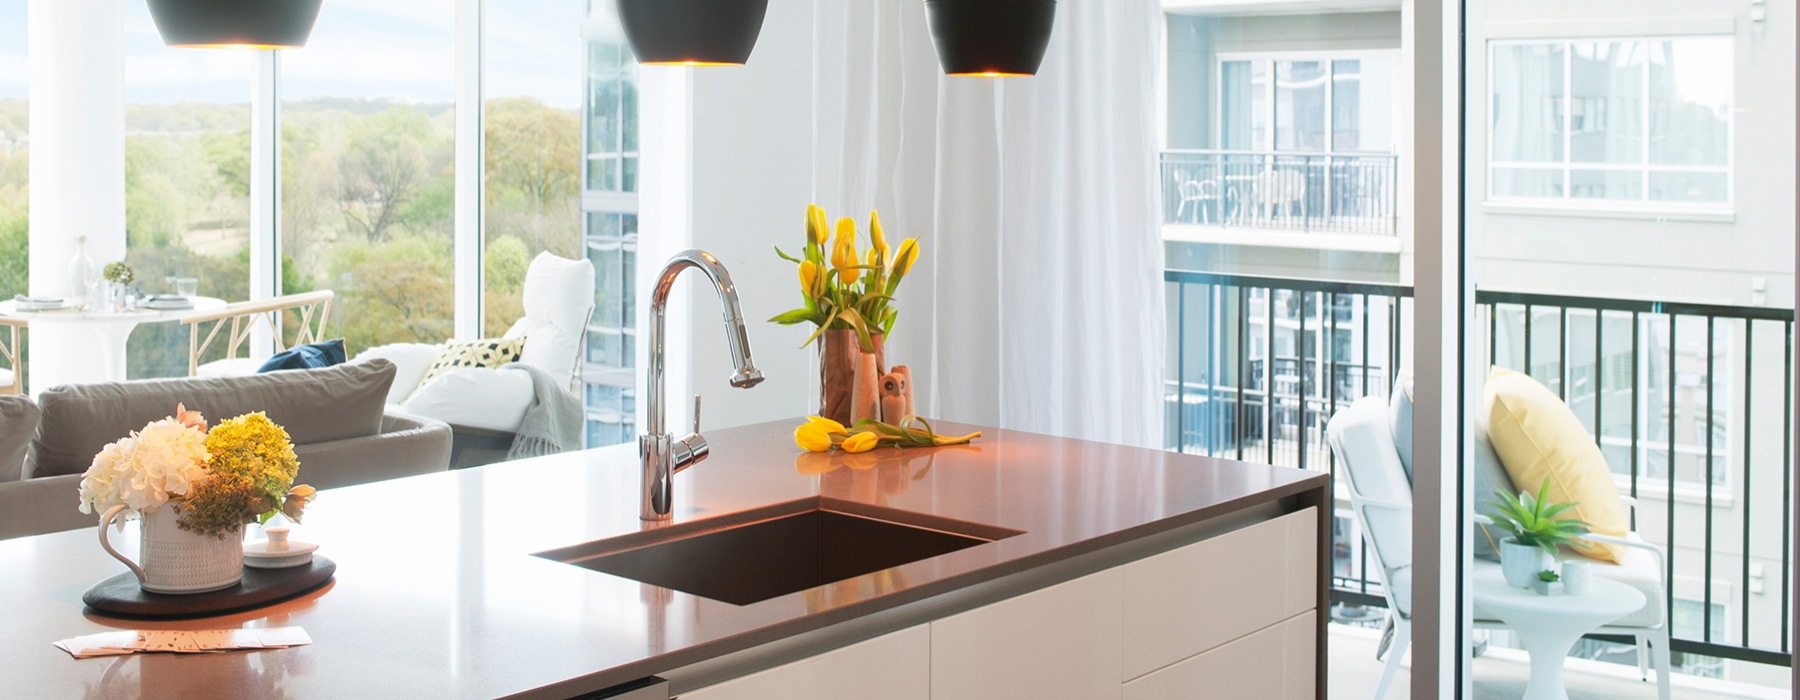 Modern pendant lighting and kitchen islands in apartments at The Registry on the Park